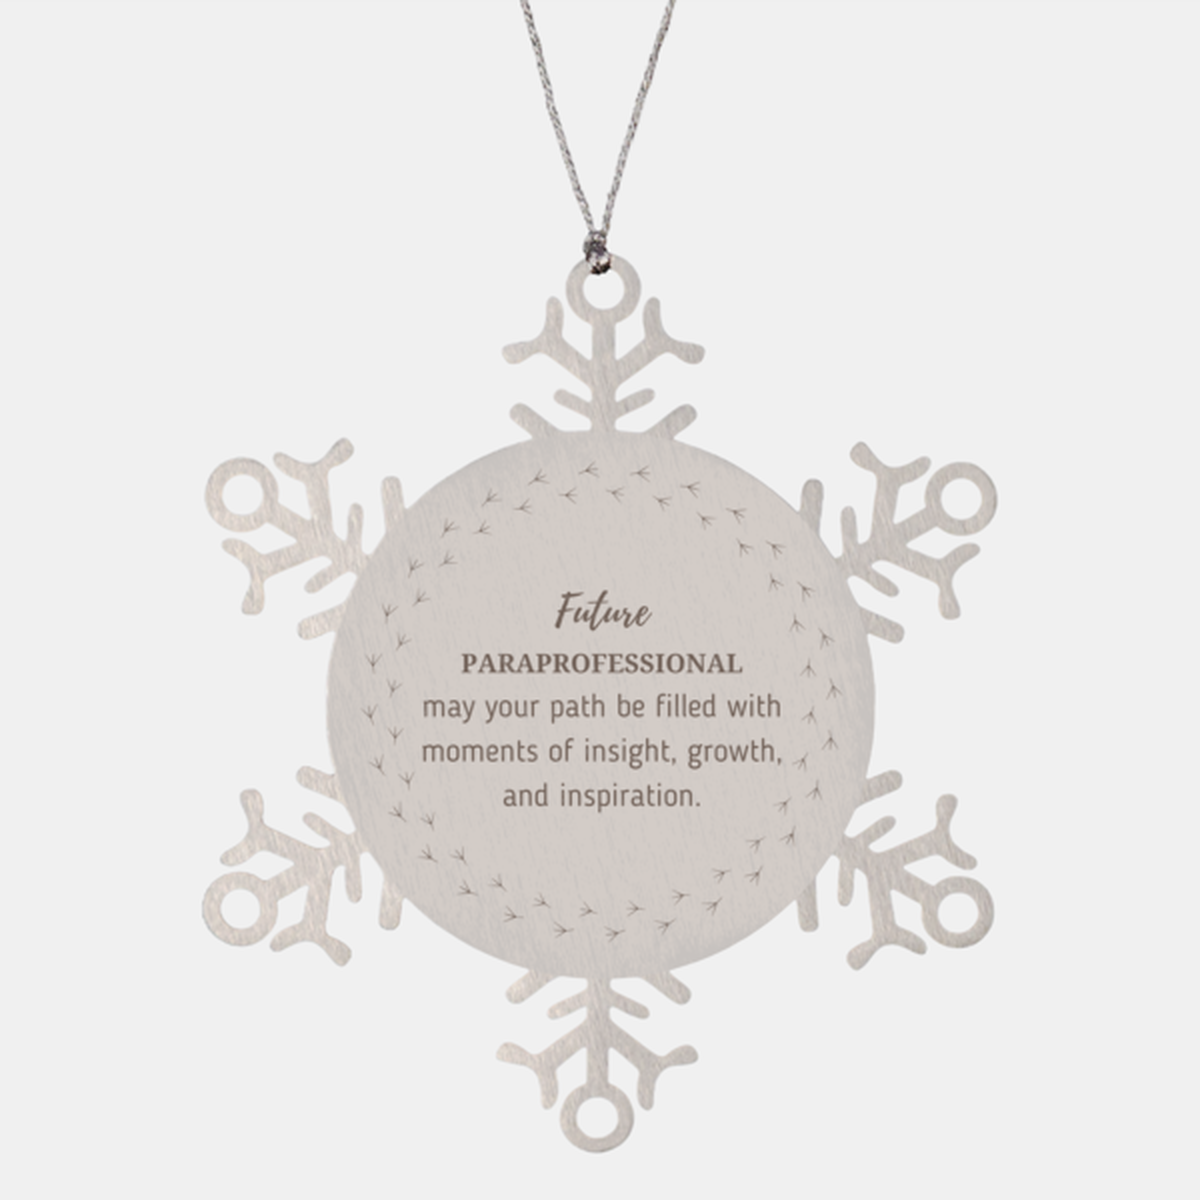 Future Paraprofessional Gifts, May your path be filled with moments of insight, Graduation Gifts for New Paraprofessional, Christmas Unique Snowflake Ornament For Men, Women, Friends